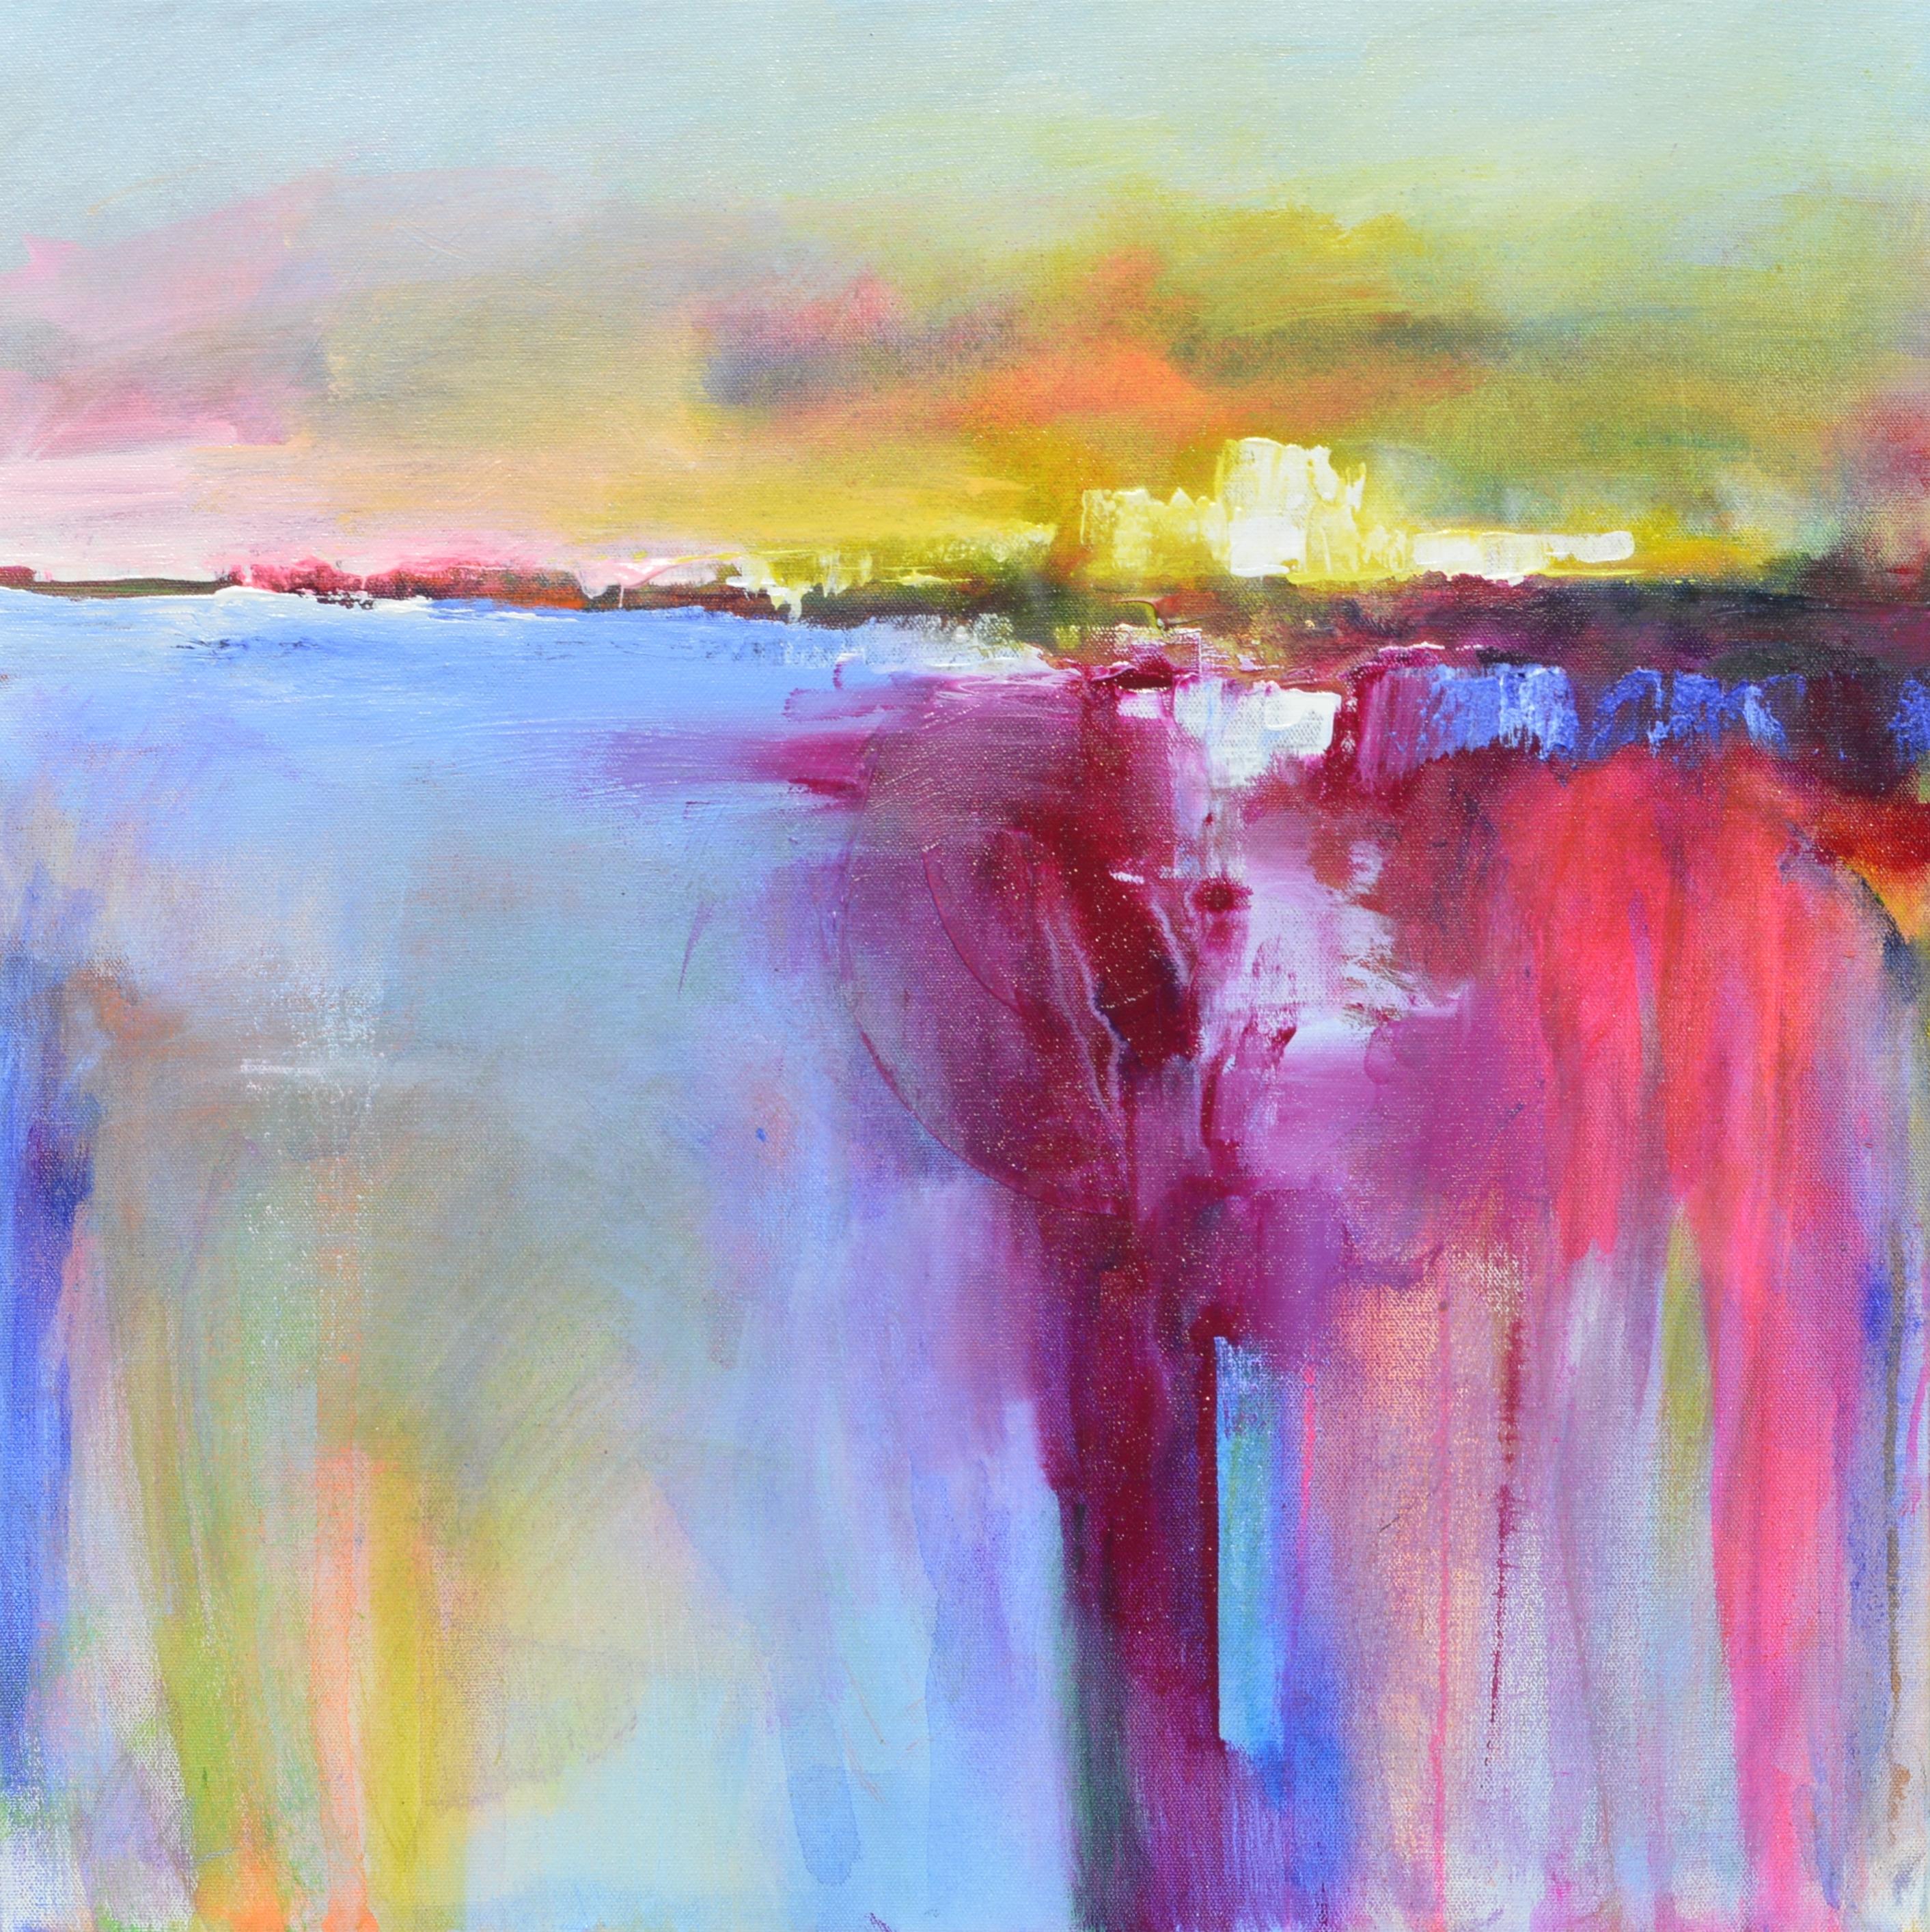 Patrick O'Boyle Abstract Painting - Landscape Abstraction - The Sun Rising